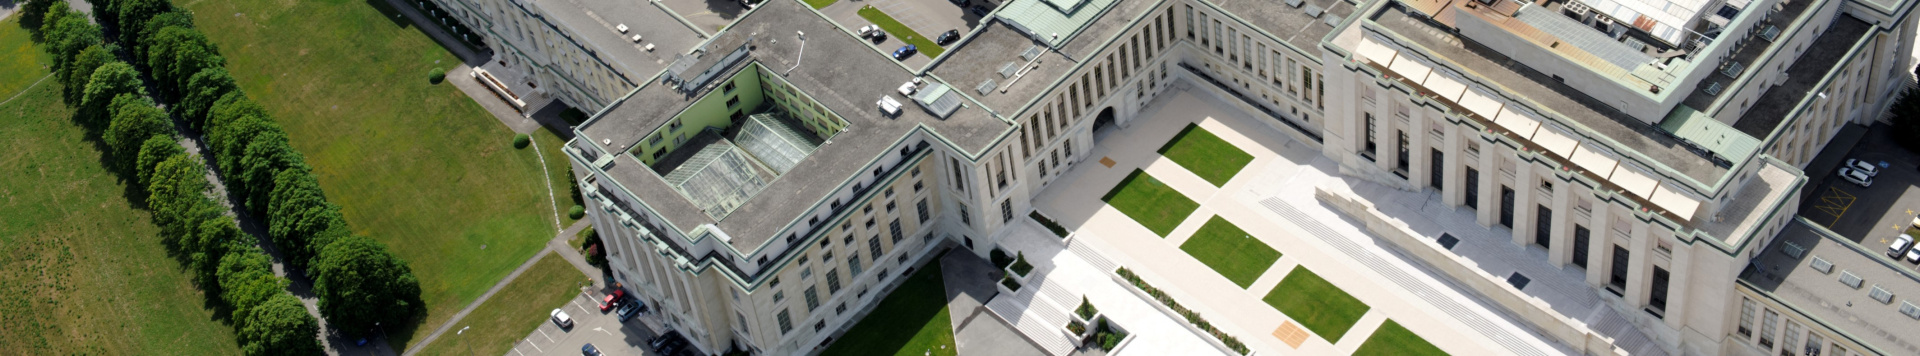 An areal view of the Palais des Nations